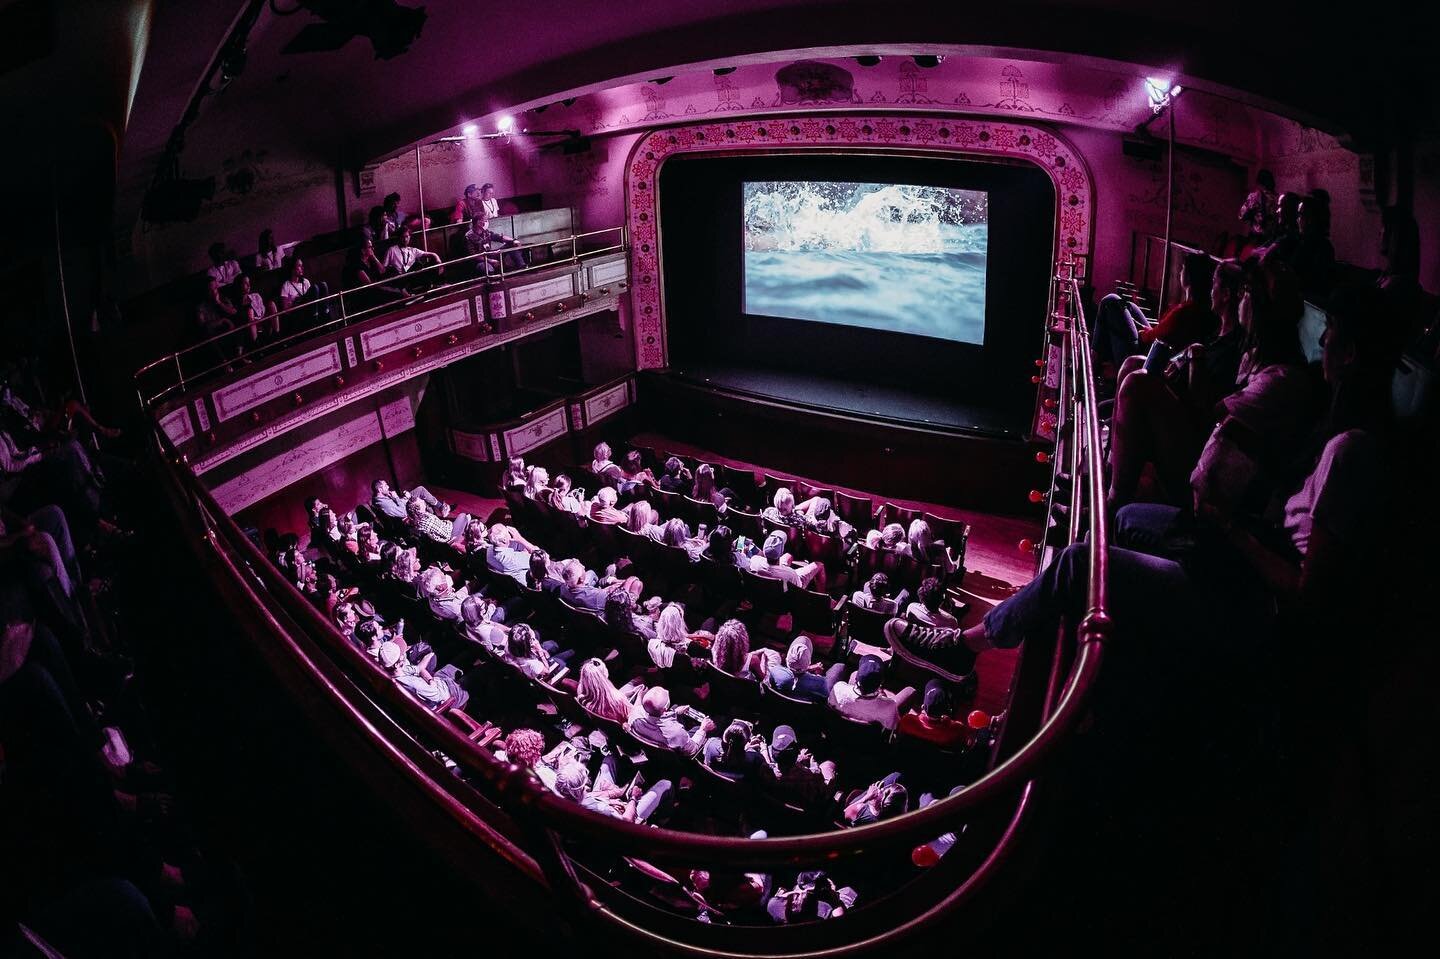 Watching a film on the big screen that you spent countless months and all nighters working on is a feeling like no other. My goal is to get back to @mountainfilm next year with a new film 🙌🏻 

Skin Swimmer will be screening at the @maineoutdoorfilm